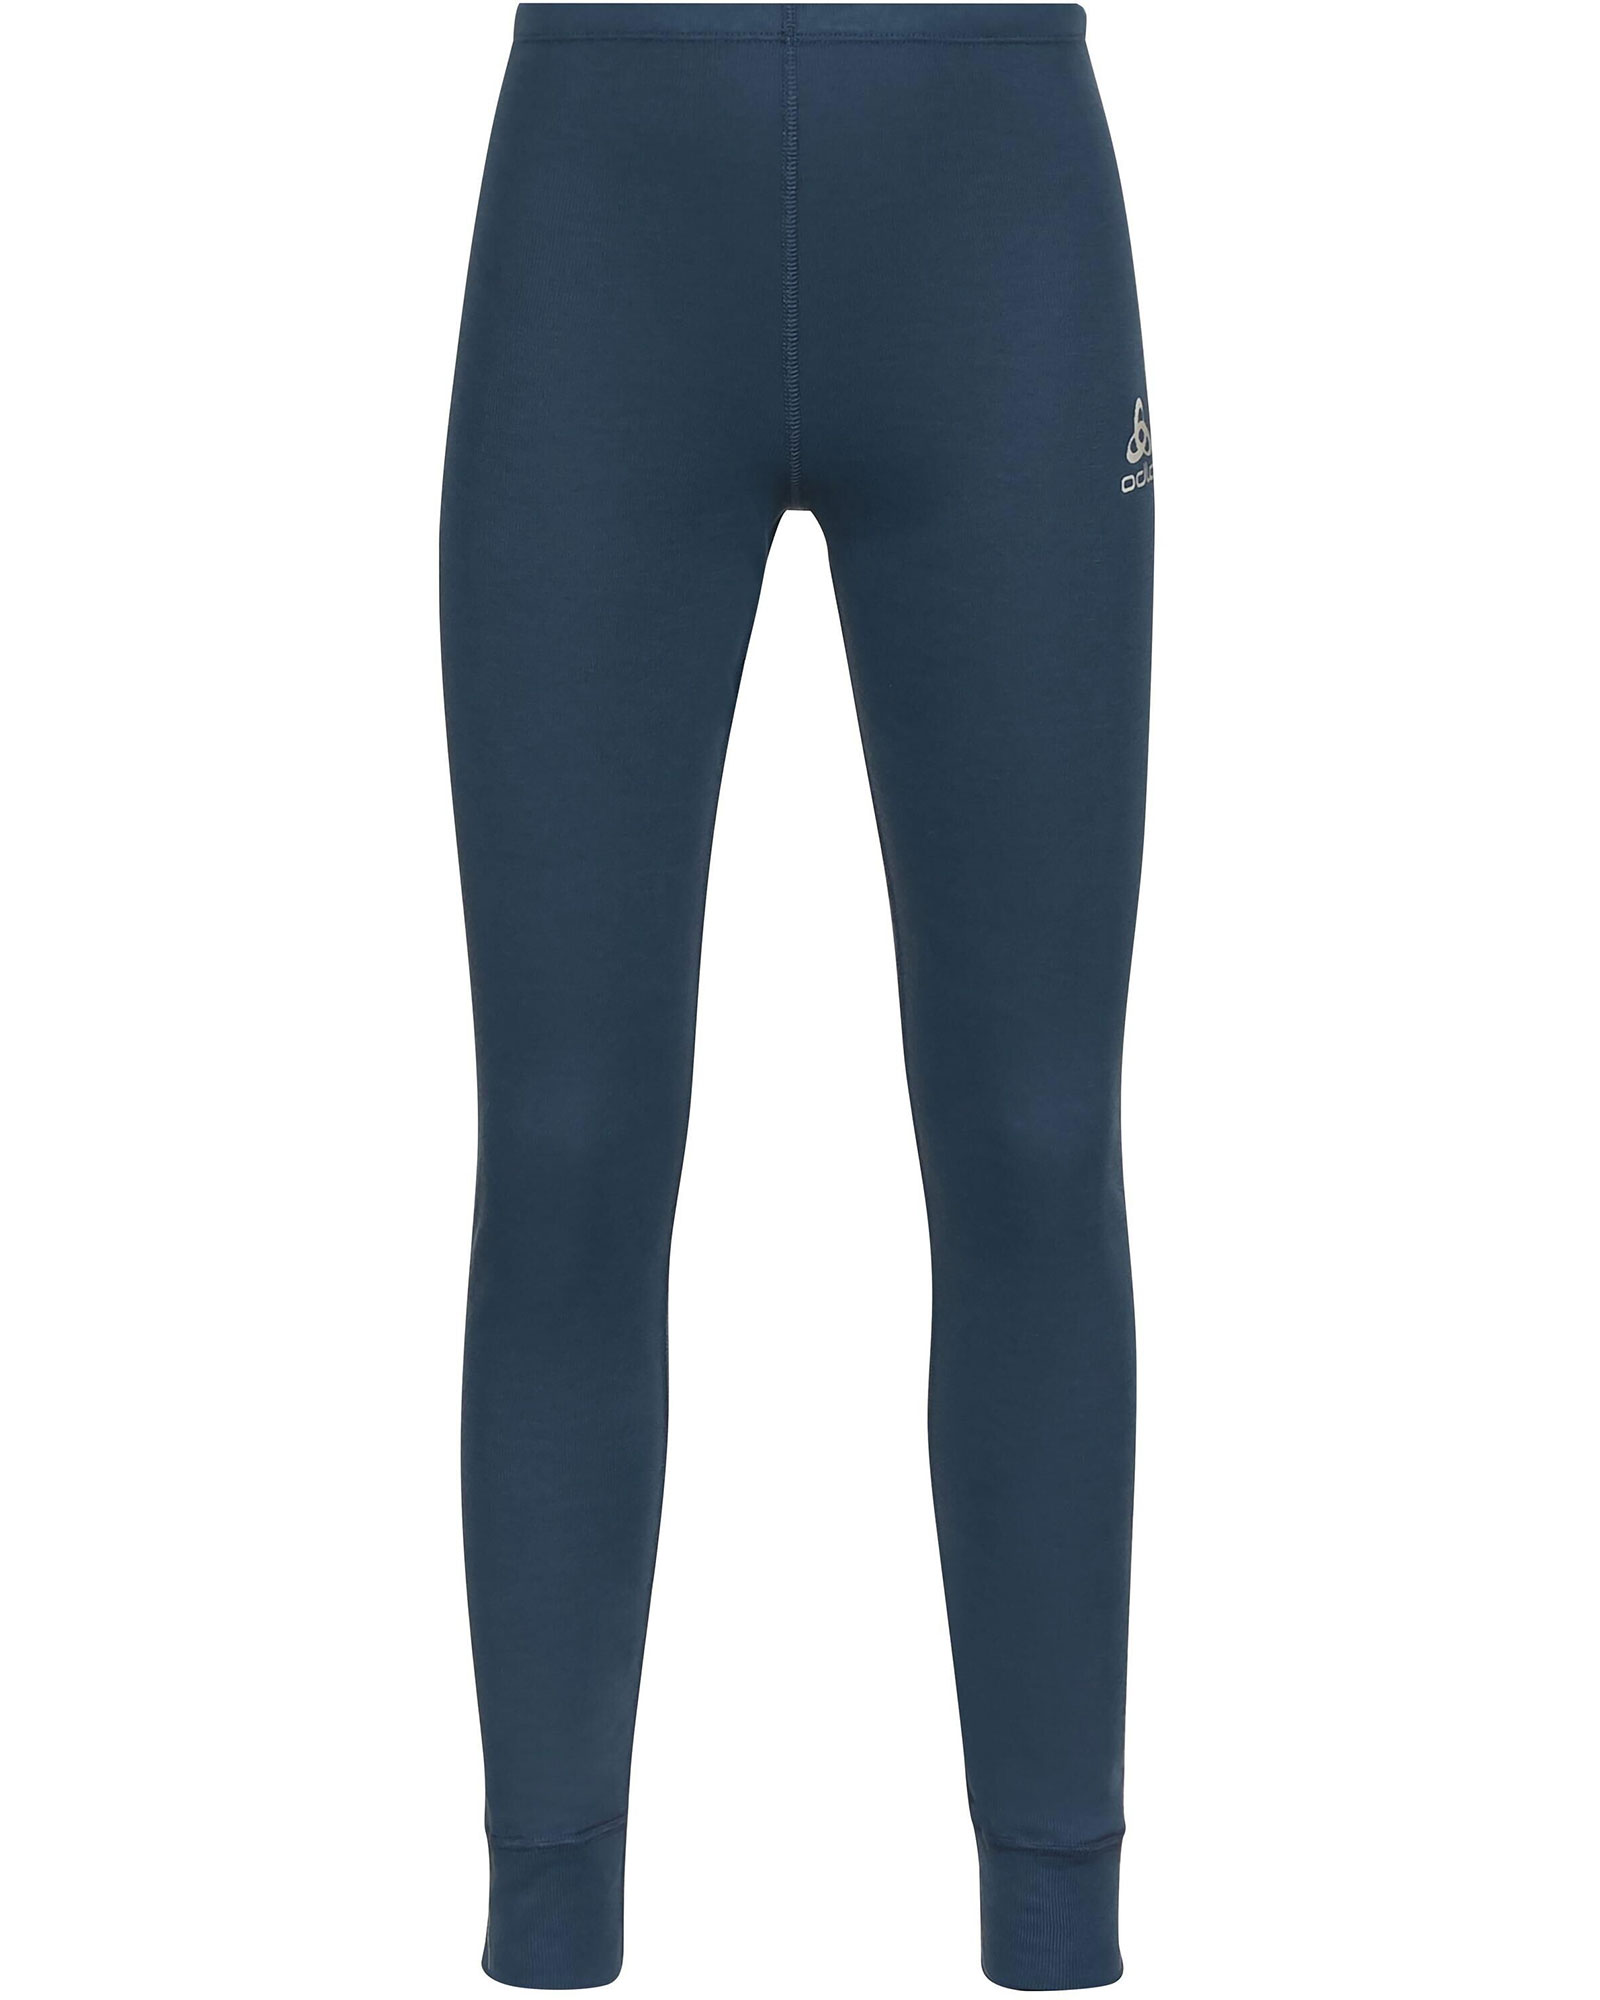 Odlo Active Warm Eco BL Kids’ Bottoms Long - Blue Wing Teal 14 Years